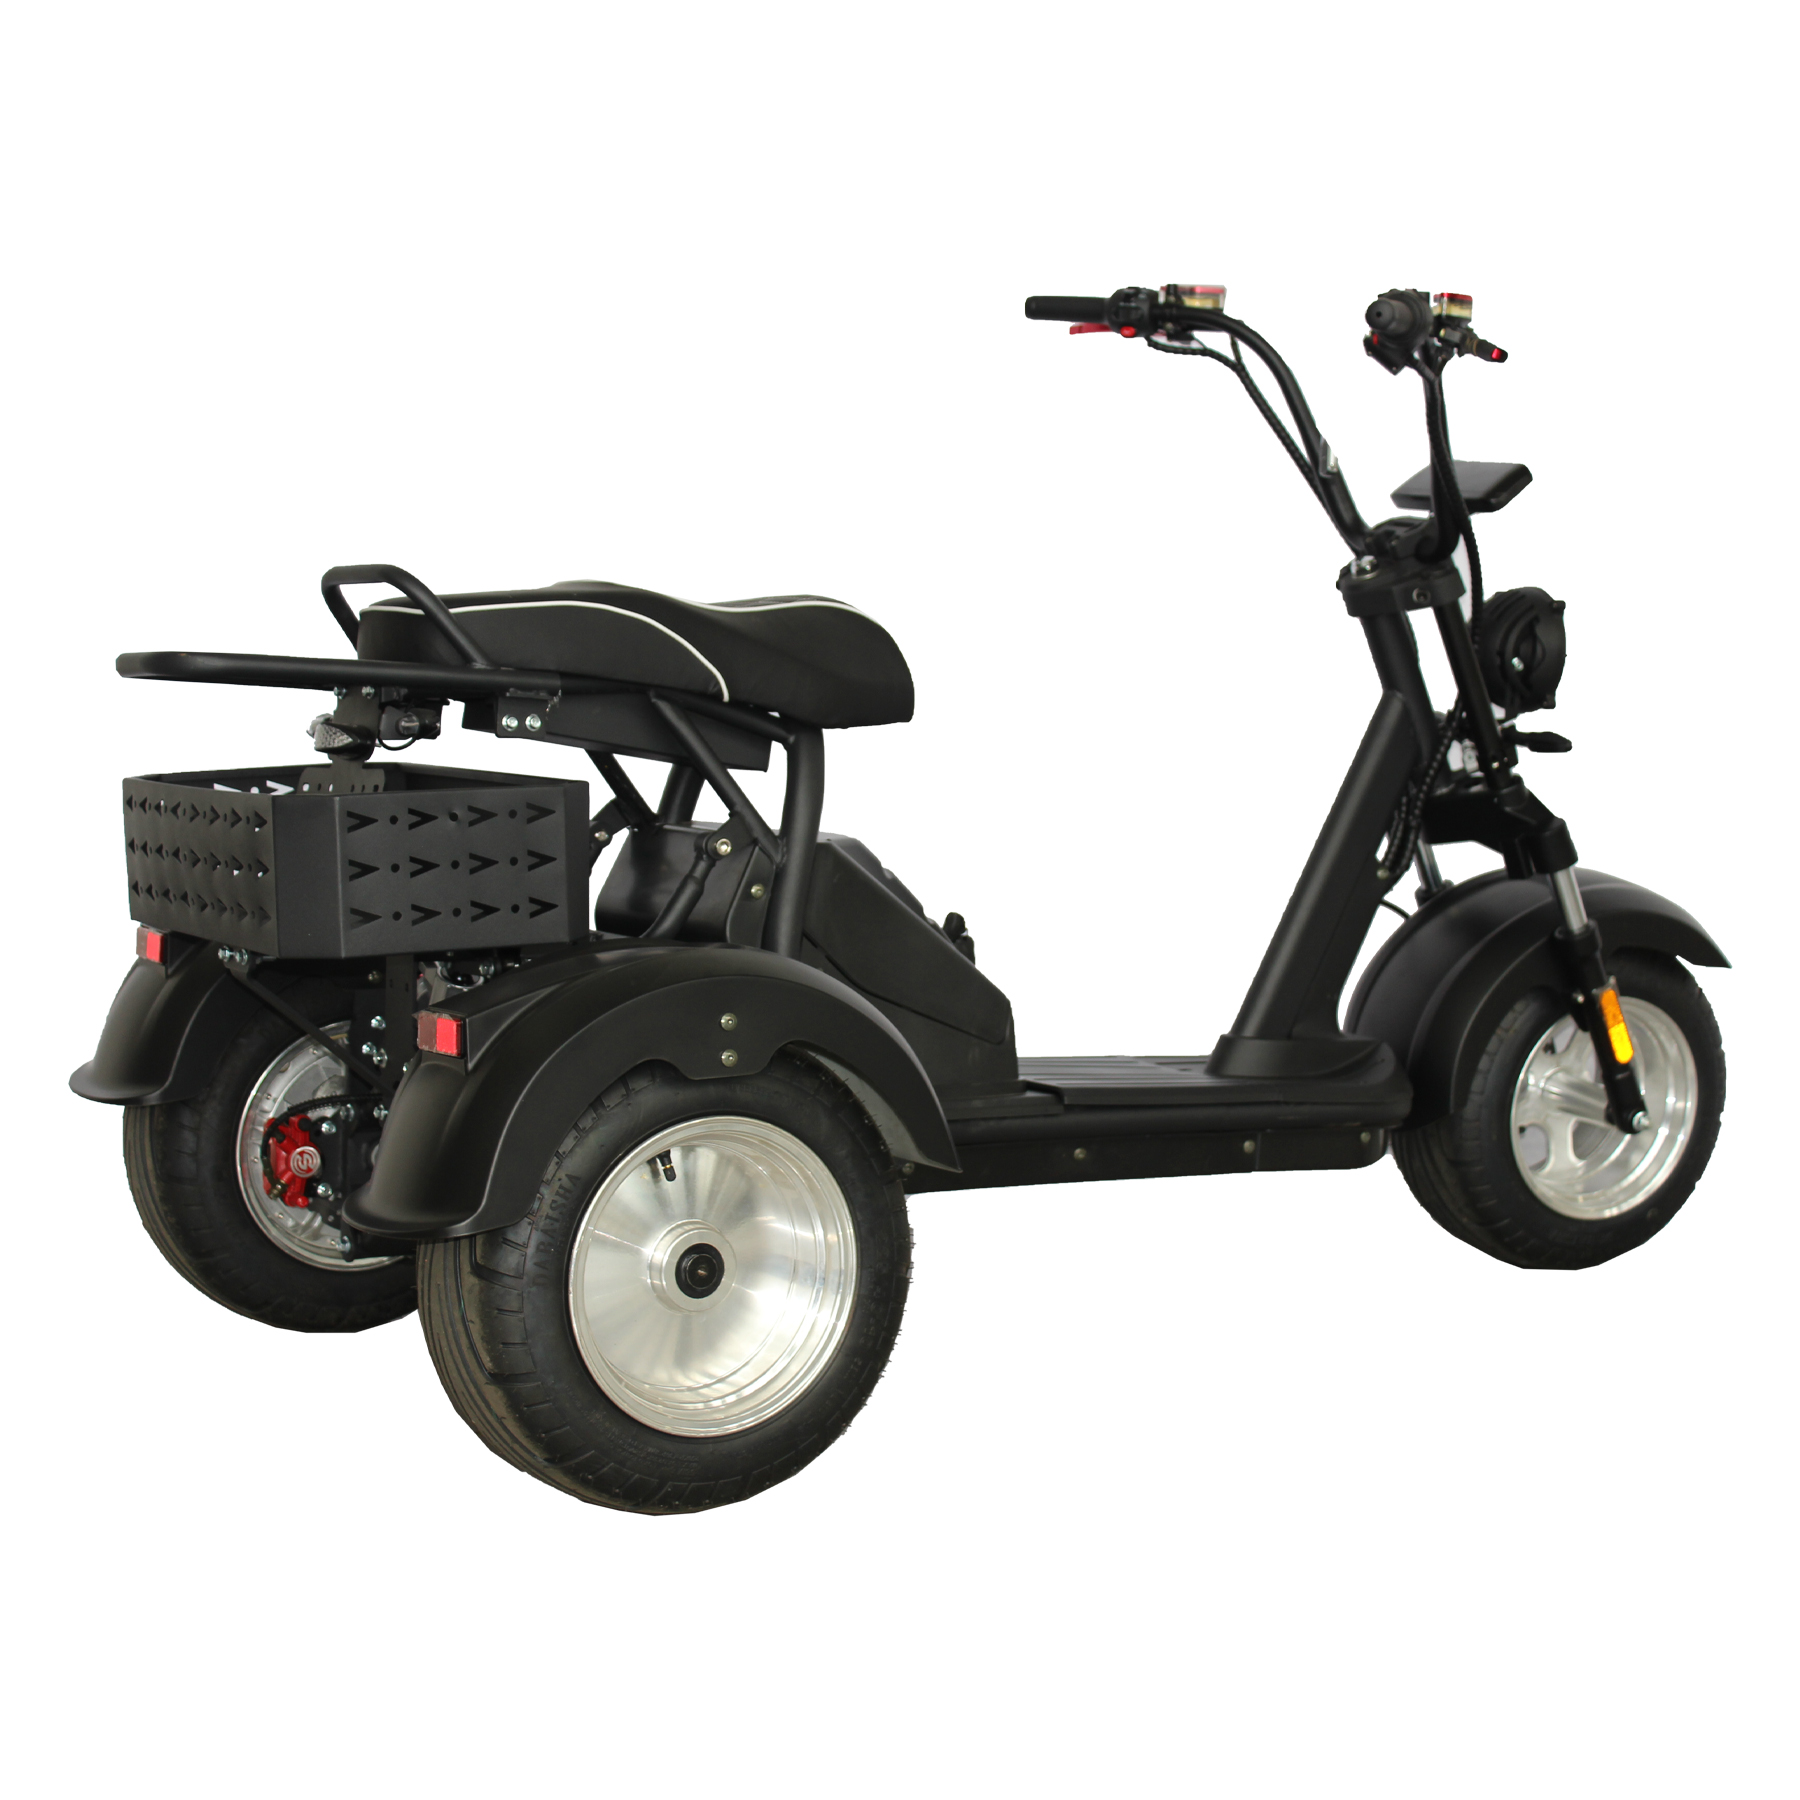 GaeaCycle Street Legal COC Electric Delivery Scooter 3 Wheels Adult Tricycle with Cargo Box Rack